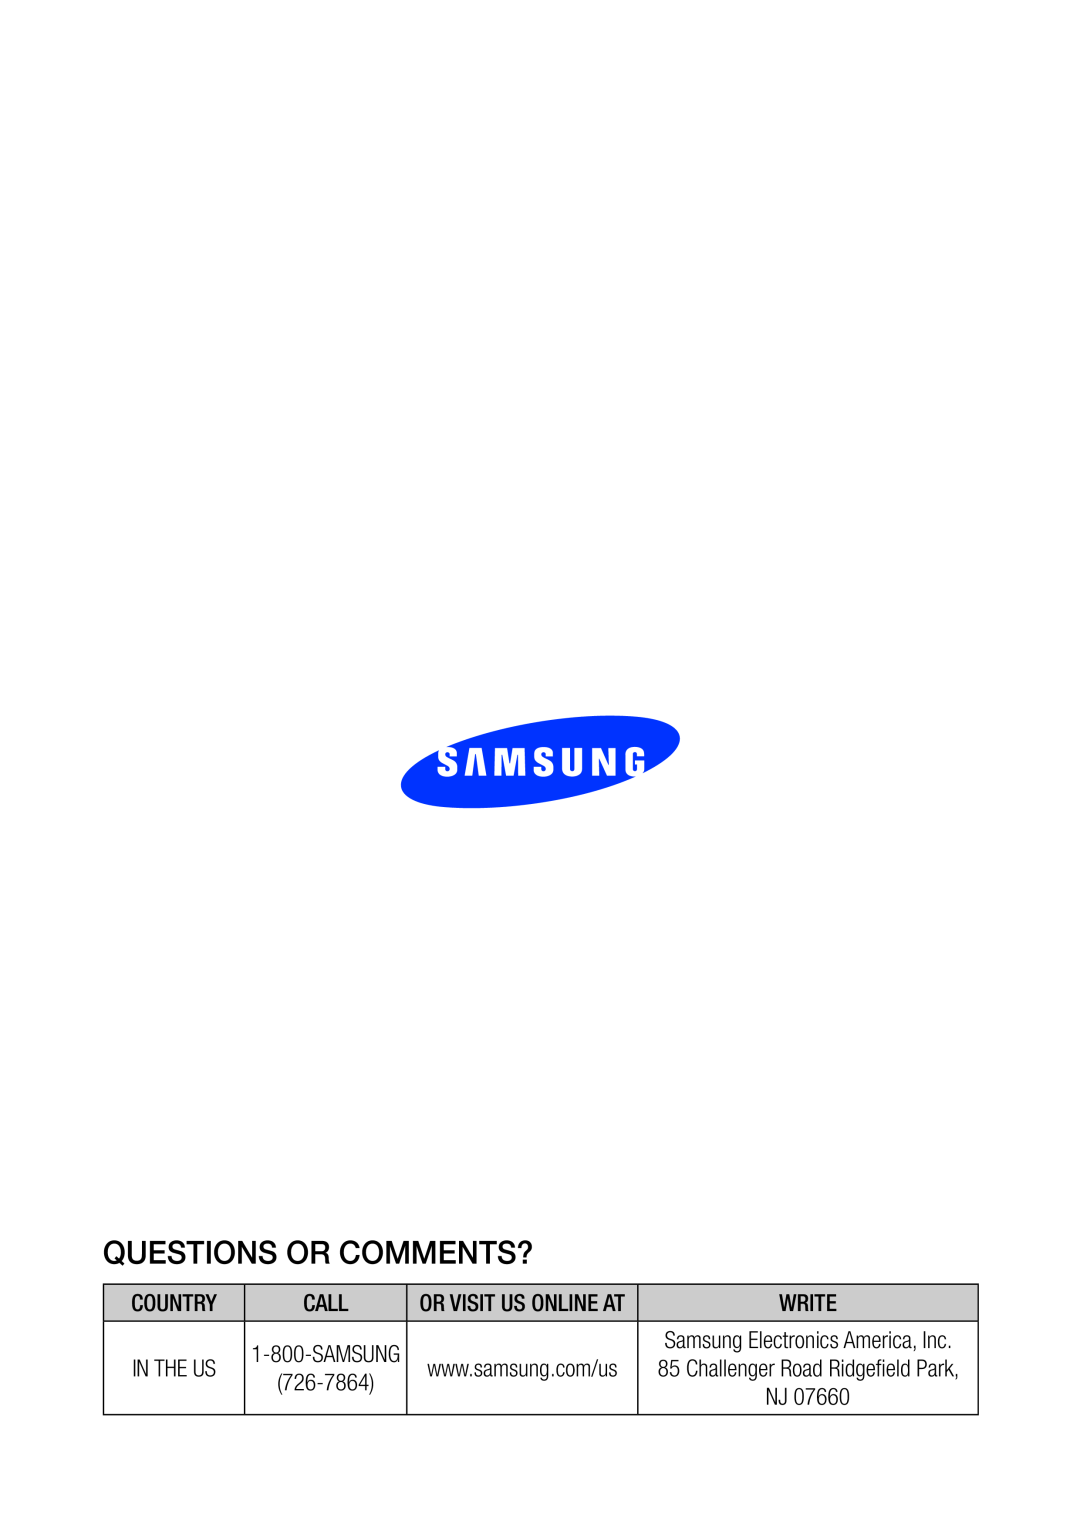 Samsung WAM750 user manual Questions Or Comments?, Country, In The Us, 726-7864, Samsung 